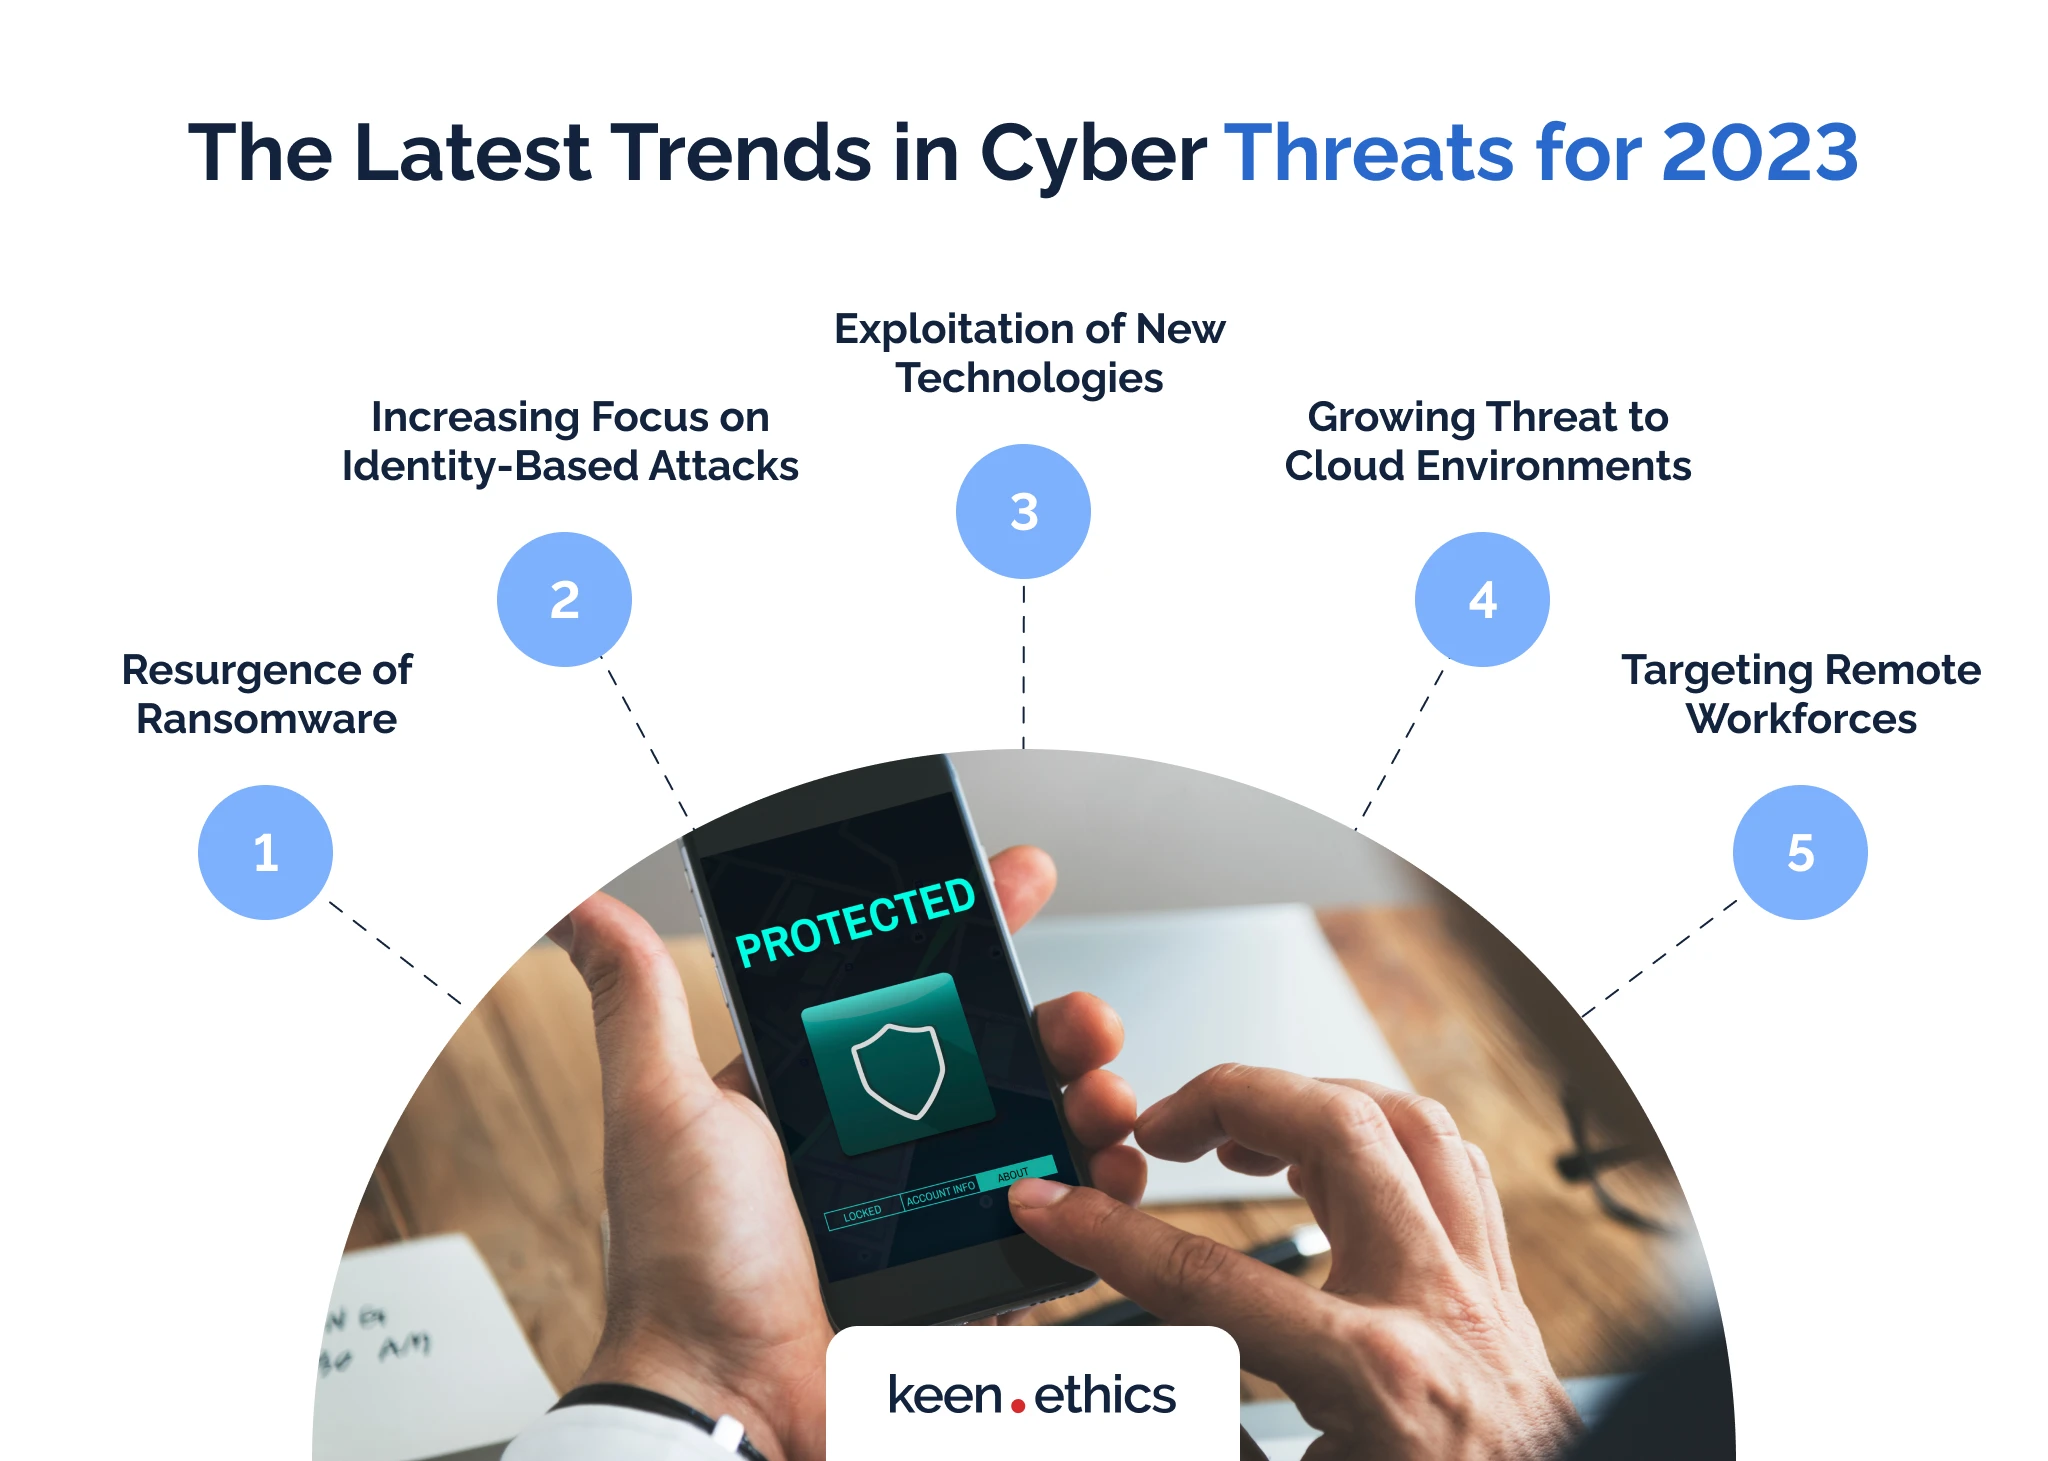 The latest trends in cyber threats for 2023